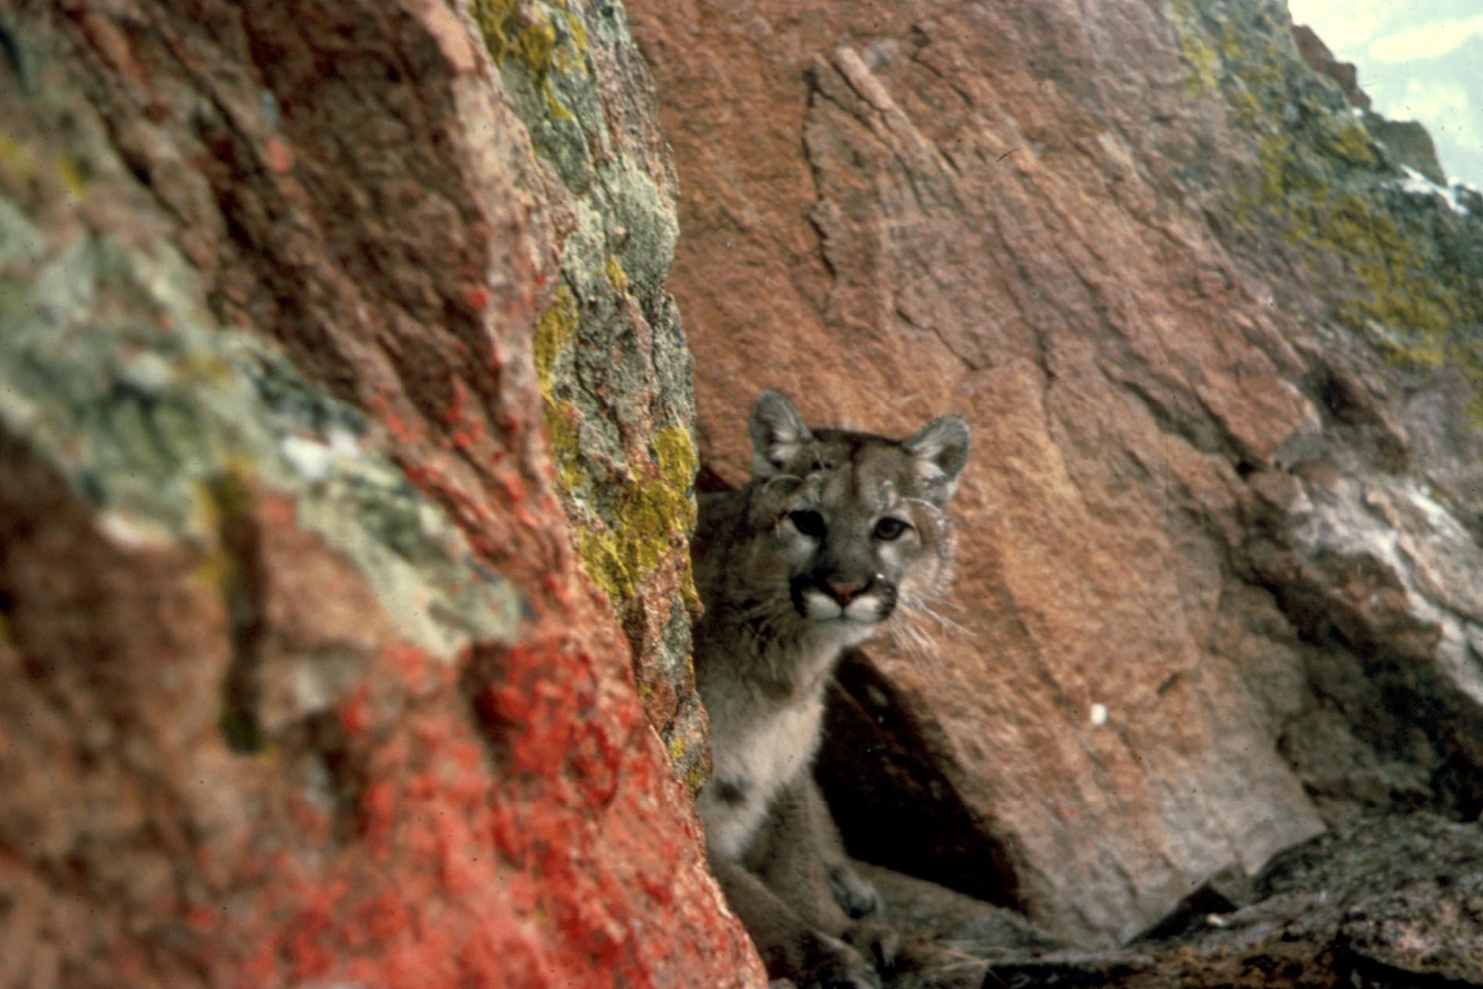 Mountain Lions Are Keystone Providers for Birds: Mountain Lion, (Felis concolor,) Courtesy US FWS, Larry Moats, Photographer